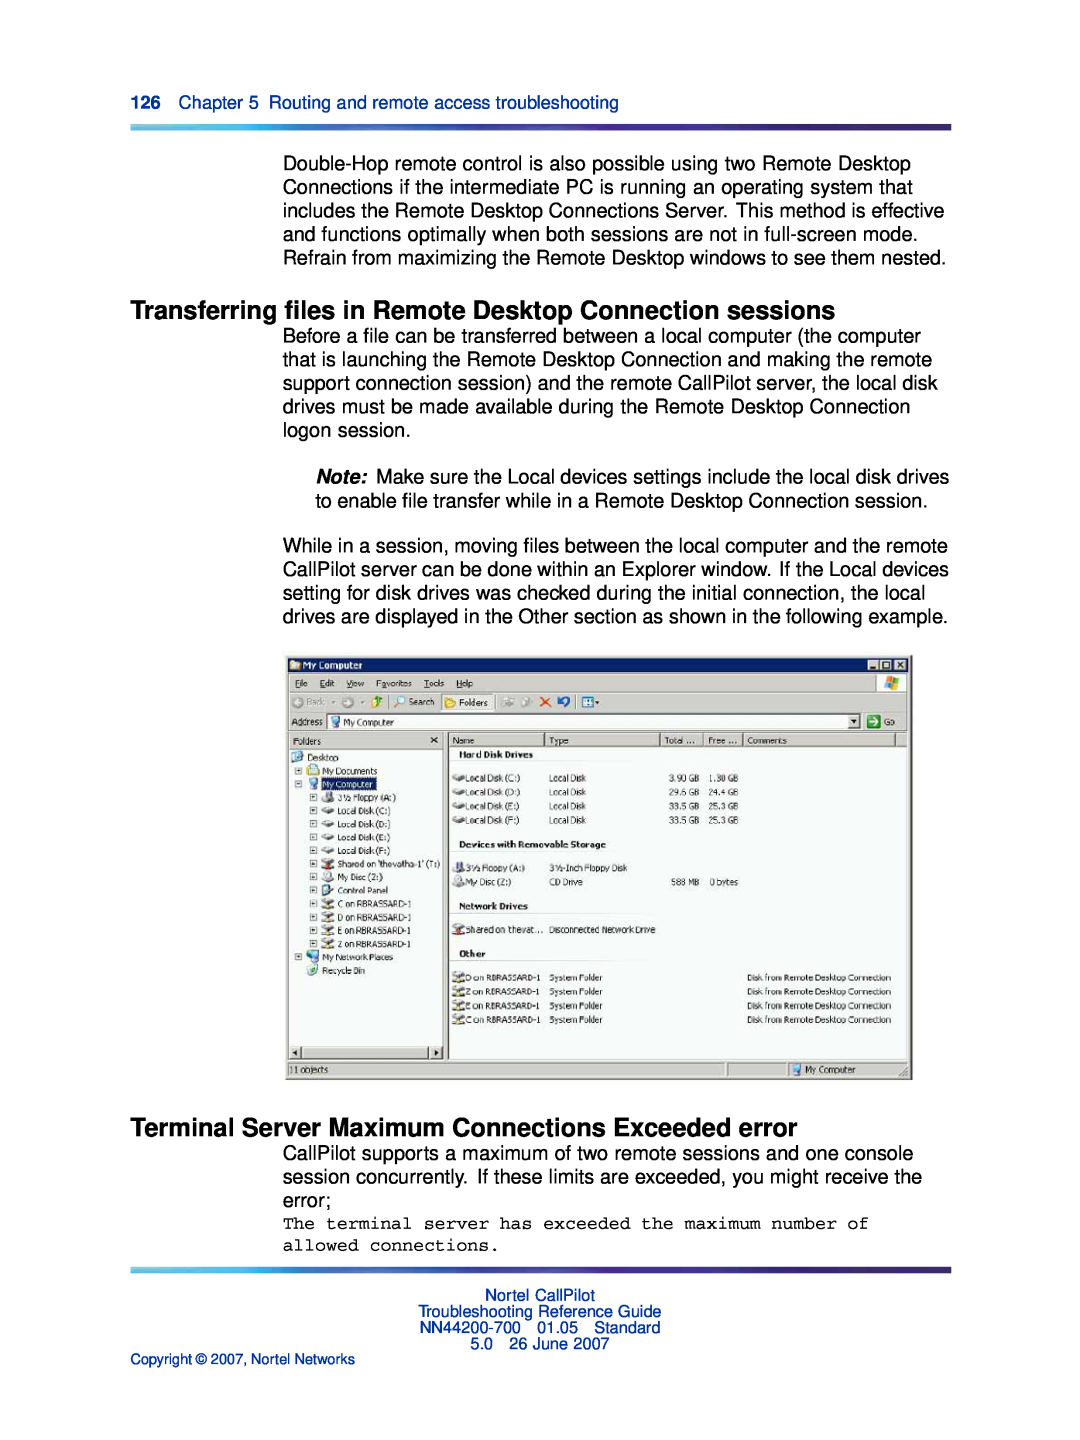 Nortel Networks NN44200-700 manual Transferring ﬁles in Remote Desktop Connection sessions 